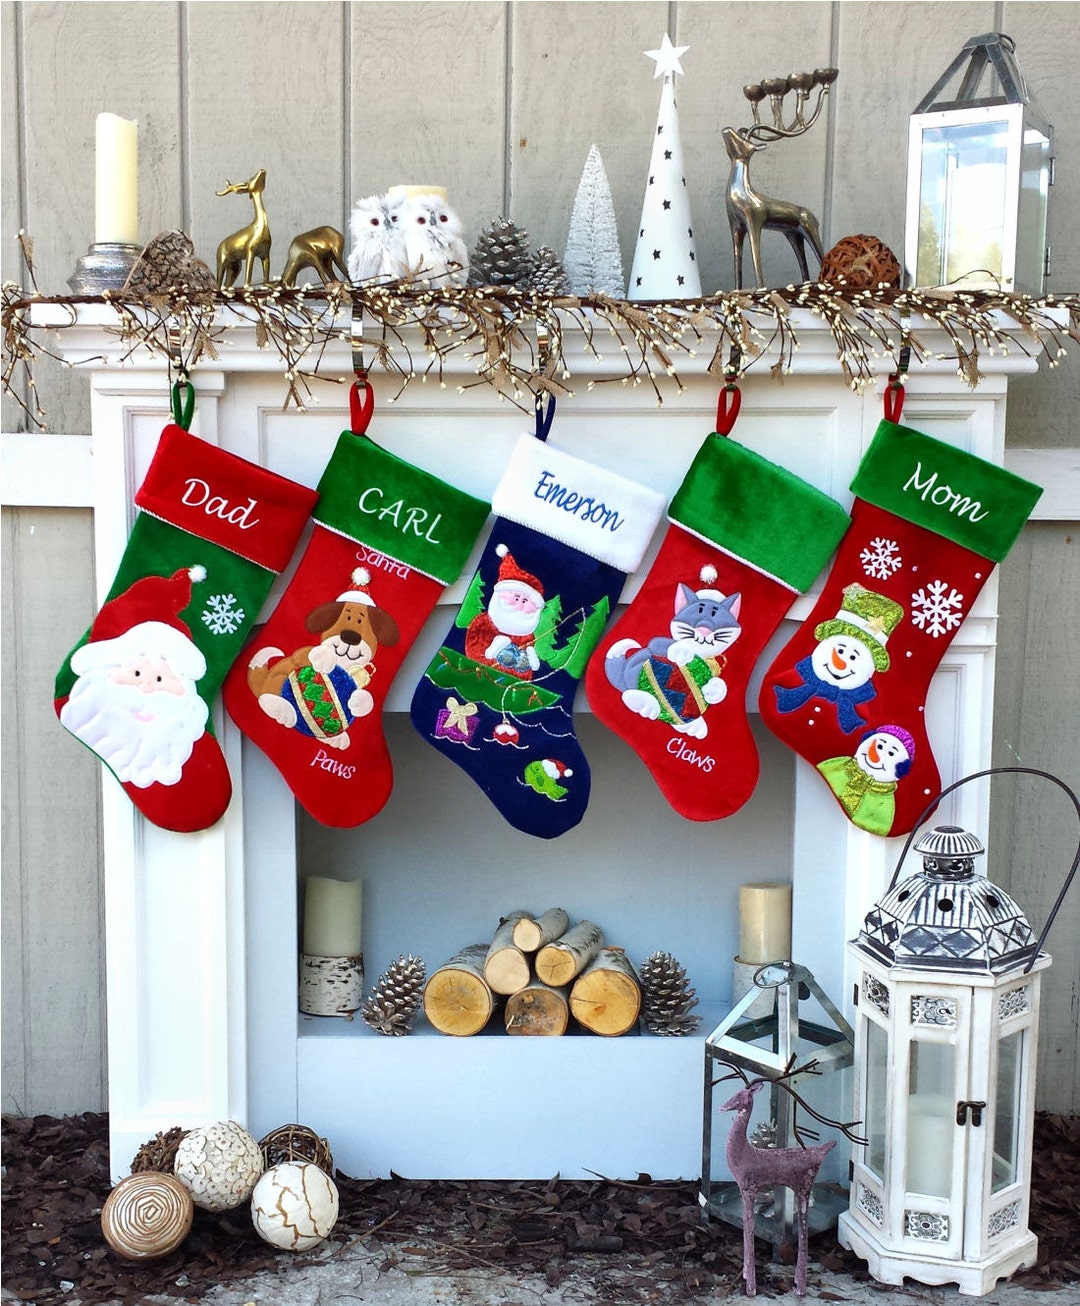 The Holiday Aisle® 24 Pack Felt Christmas Stockings, 19 Inches Red And  White Christmas Stockings Hanging Ornaments, White Cuff With Gold Trim  Christmas Stockings For Family Christmas Holiday Decorations